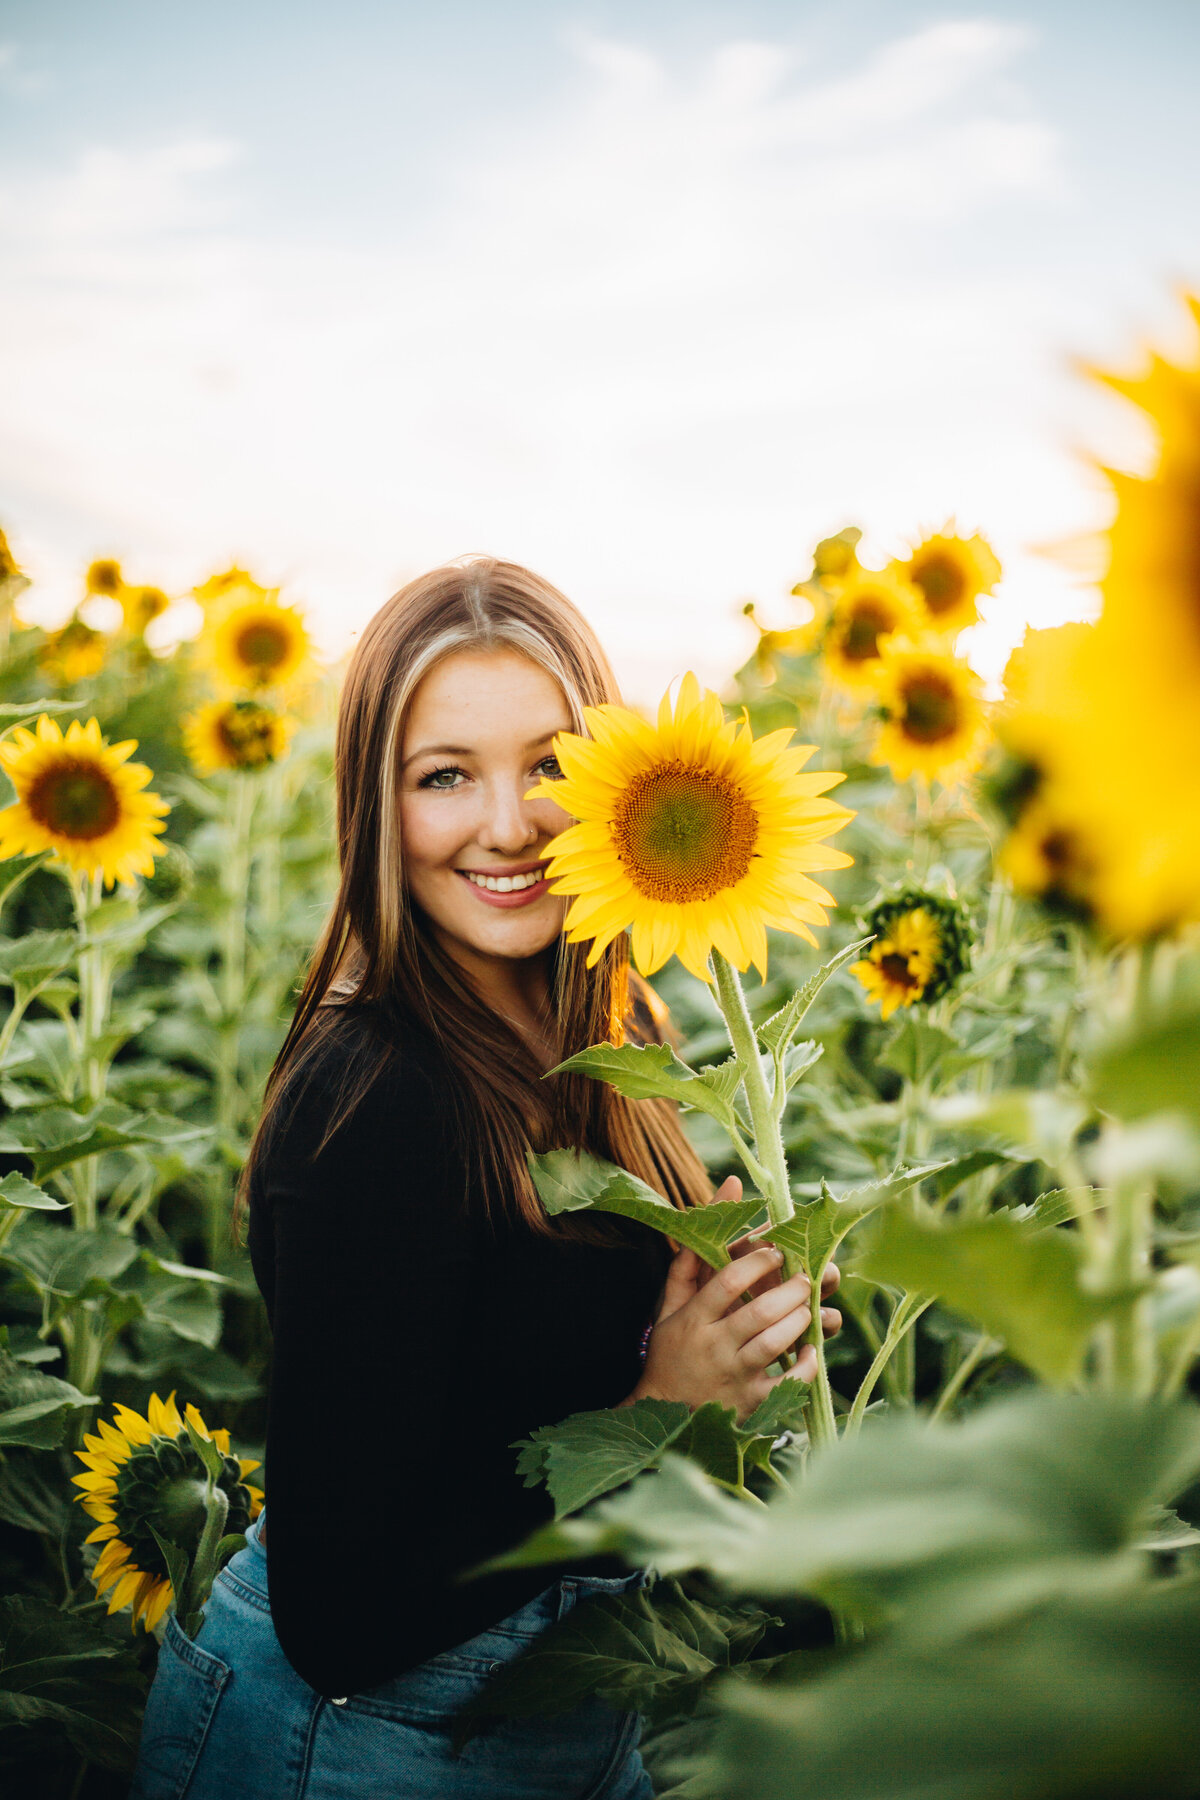 Alexi poses with a sunflower for her Montrose senior pictures.